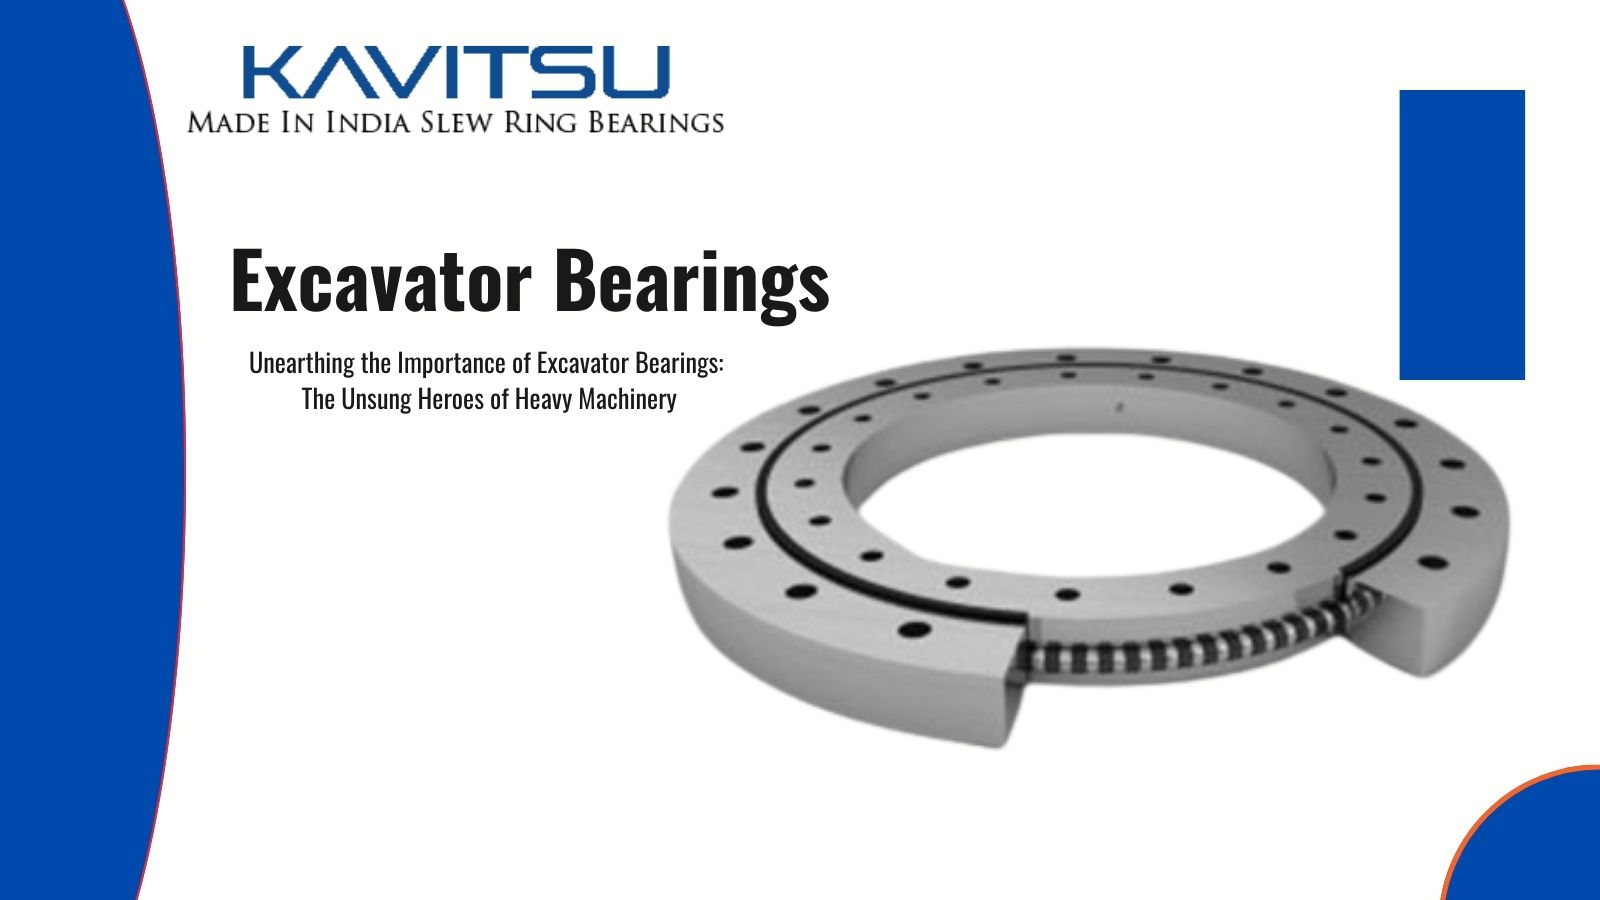 Unearthing the Importance of Excavator Bearings The Unsung Heroes of Heavy Machinery